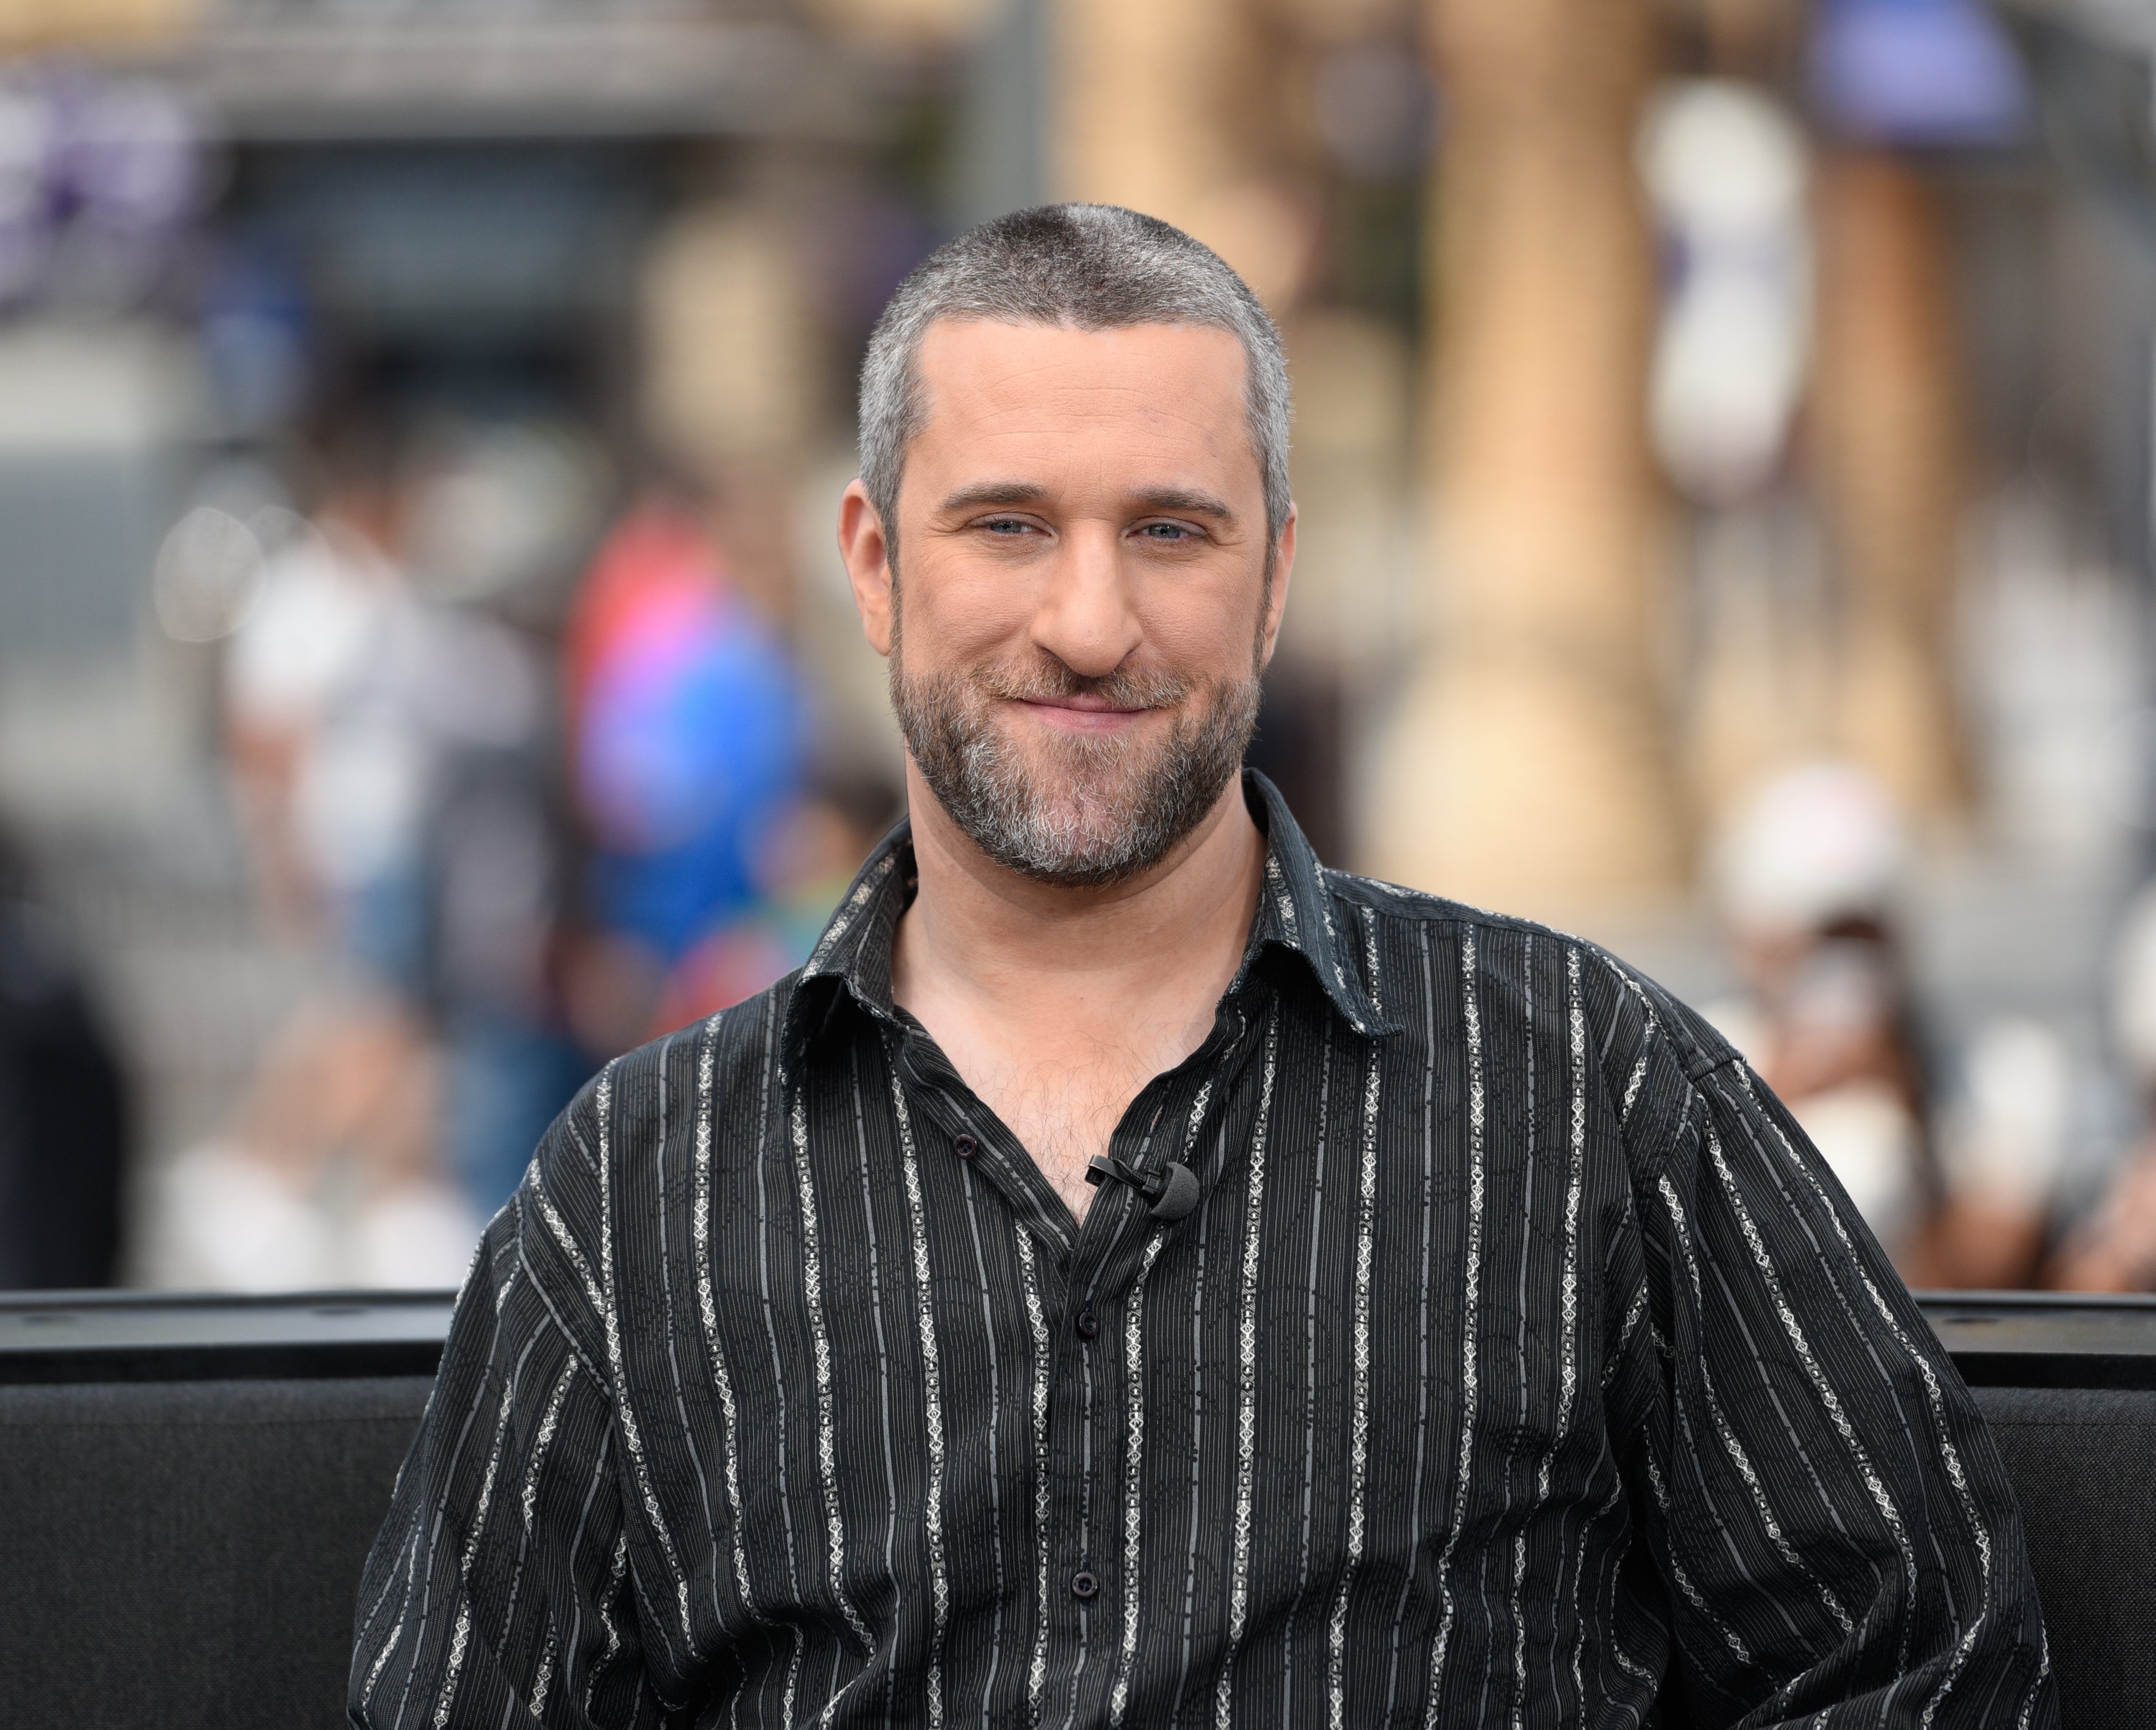 Dustin Diamond visits "Extra" at Universal Studios Hollywood on May 16, 2016 in Universal City, California. | Photo by Noel Vasquez/Getty Images 